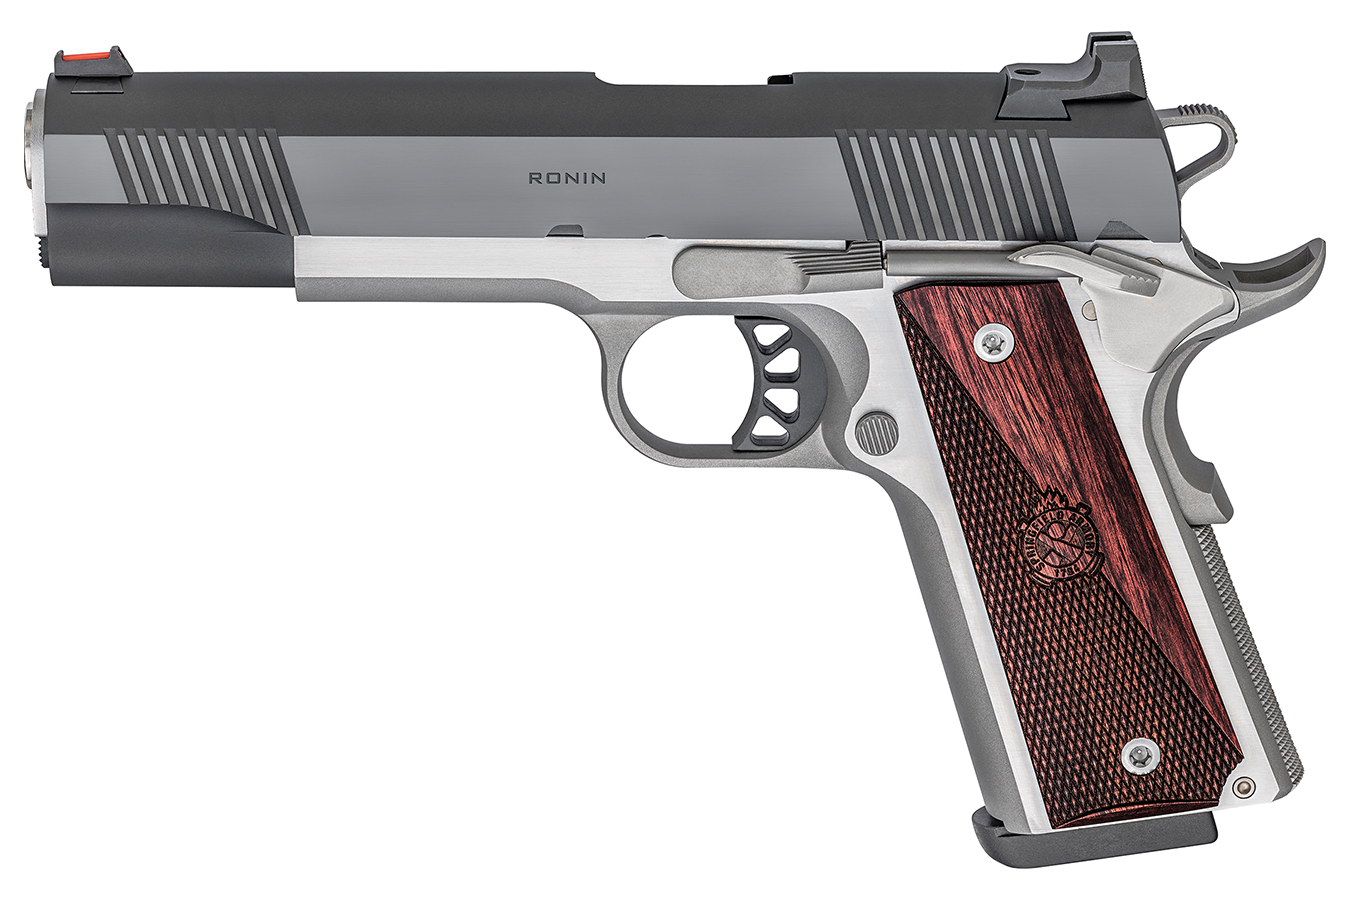 No. 3 Best Selling: SPRINGFIELD RONIN 10MM 1911 SEMI-AUTO PISTOL WITH WOOD GRIPS